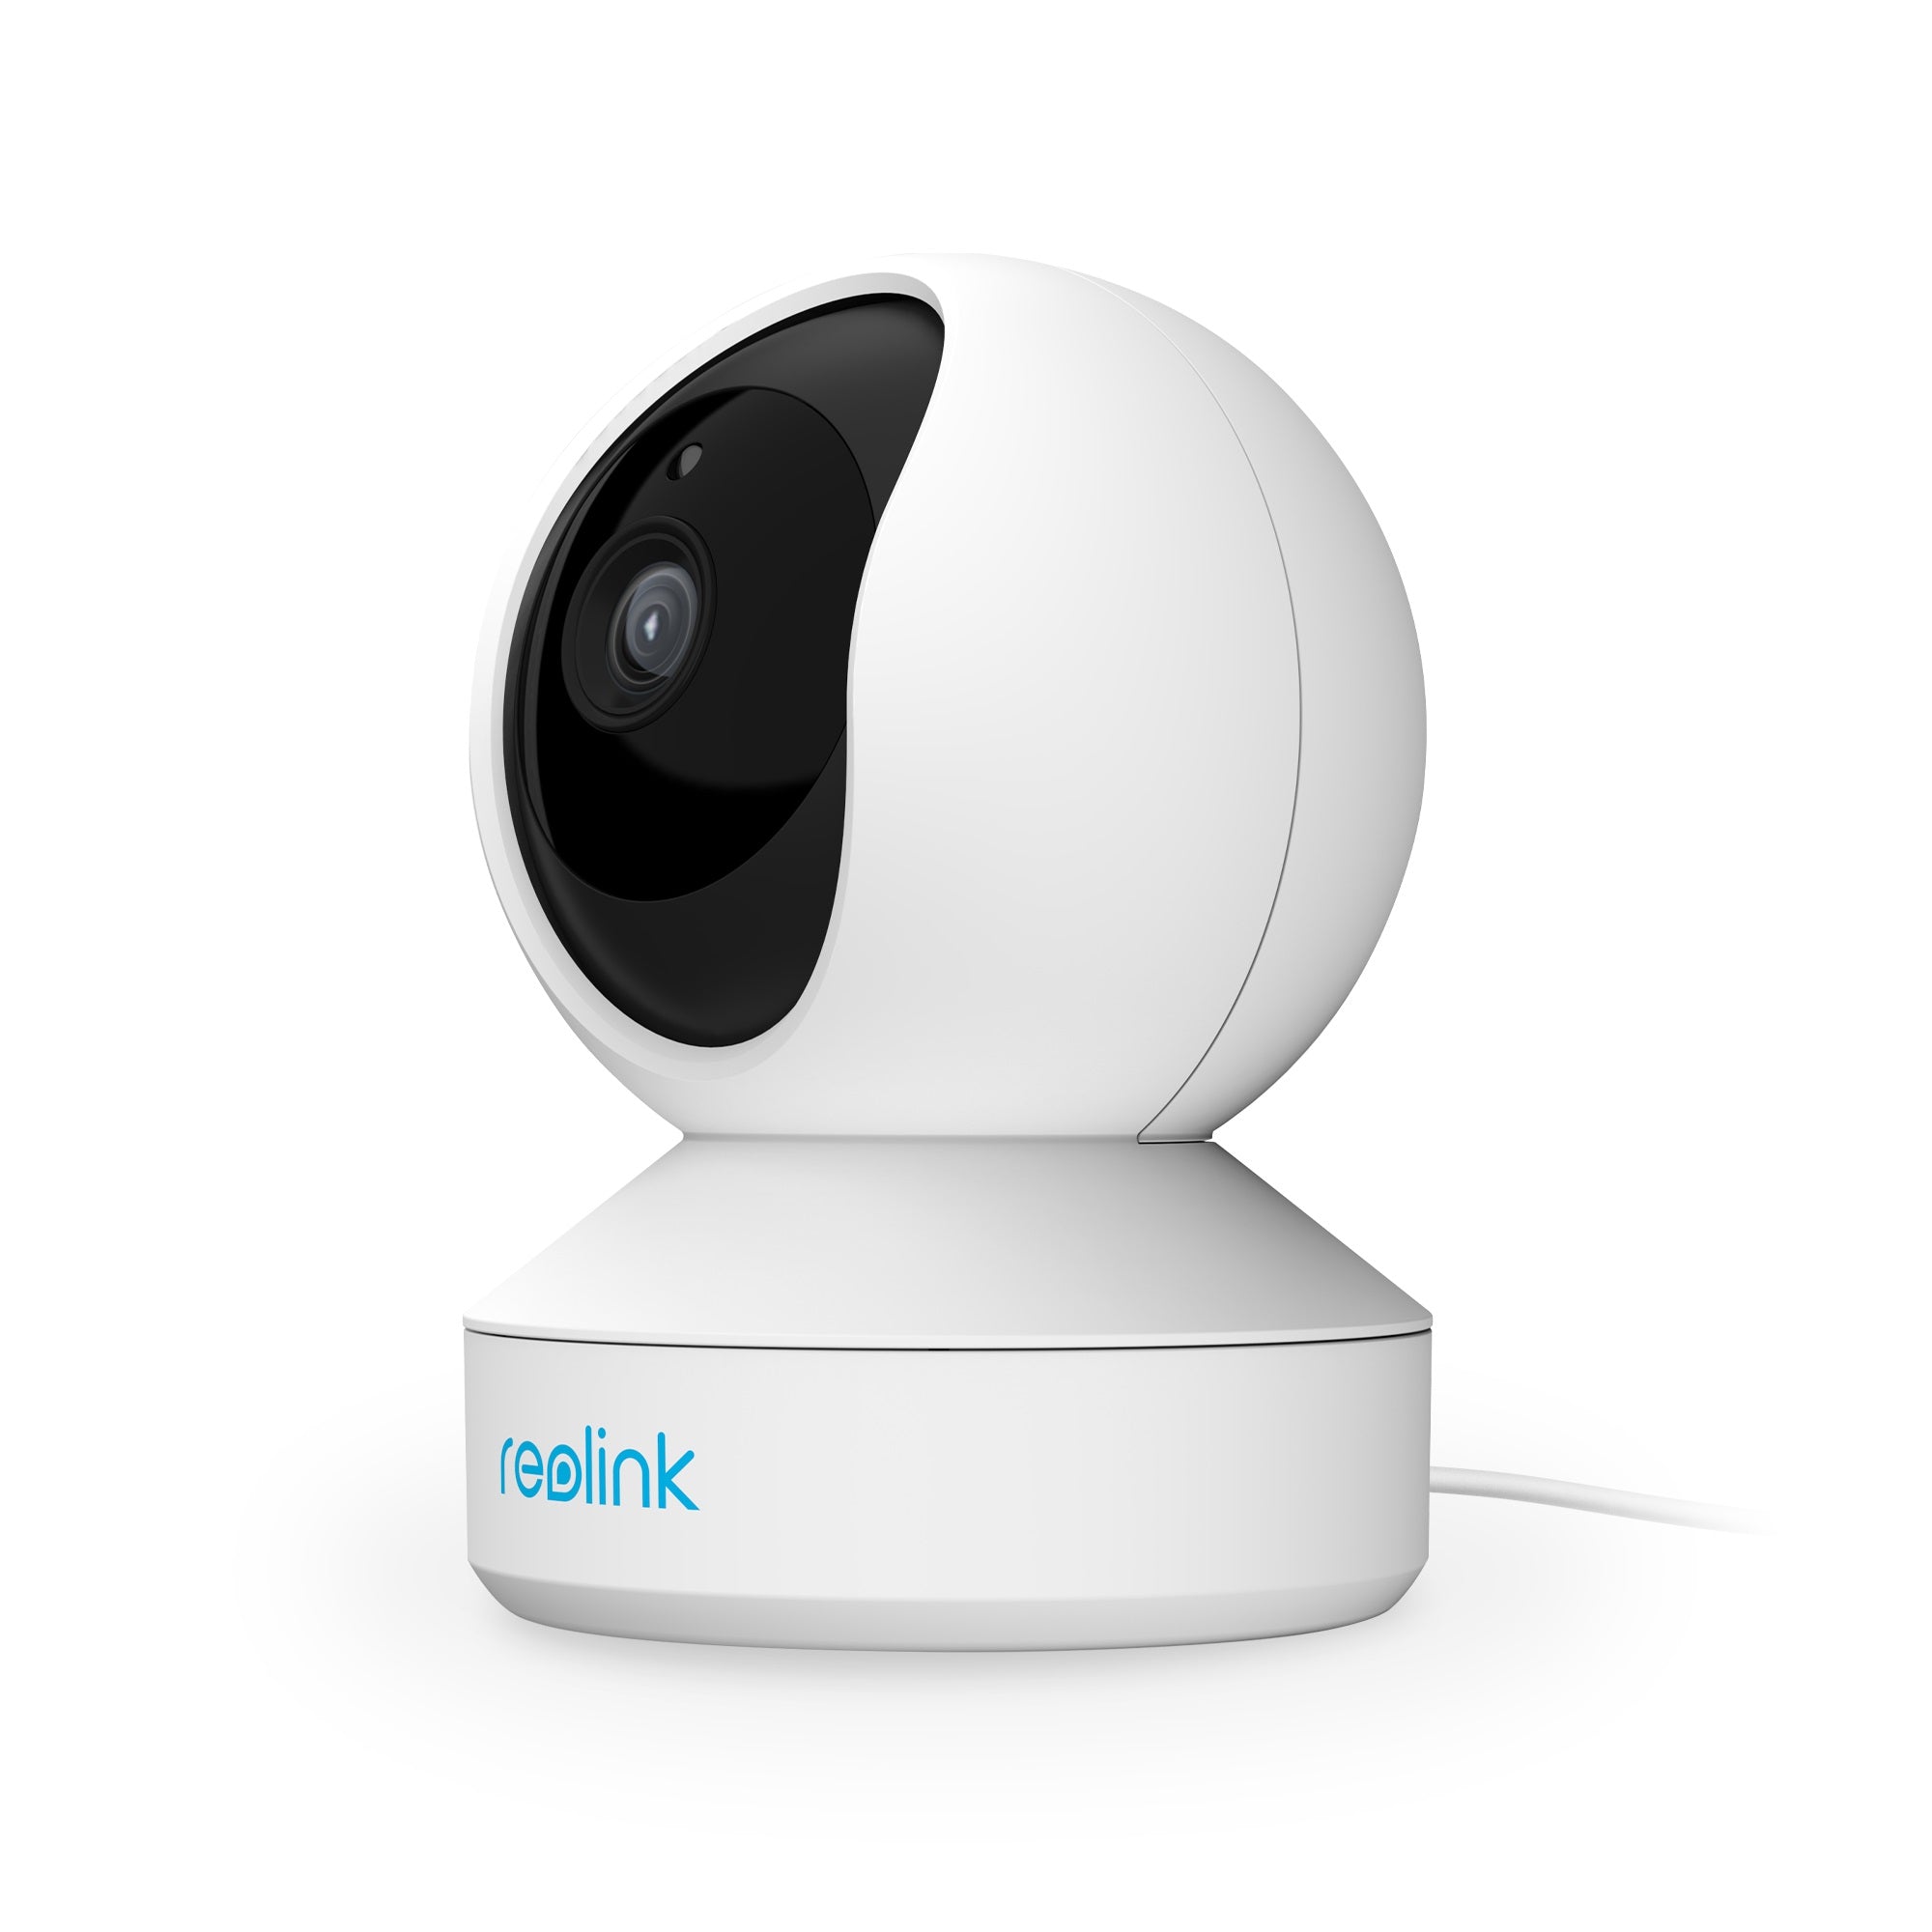 Reolink E1 Zoom V2 5MP Indoor WiFi Security Camera | Pan & Tilt with 3x Optical Zoom, Auto-Tracking, Smart AI Person/Pet Notifications, Night Vision